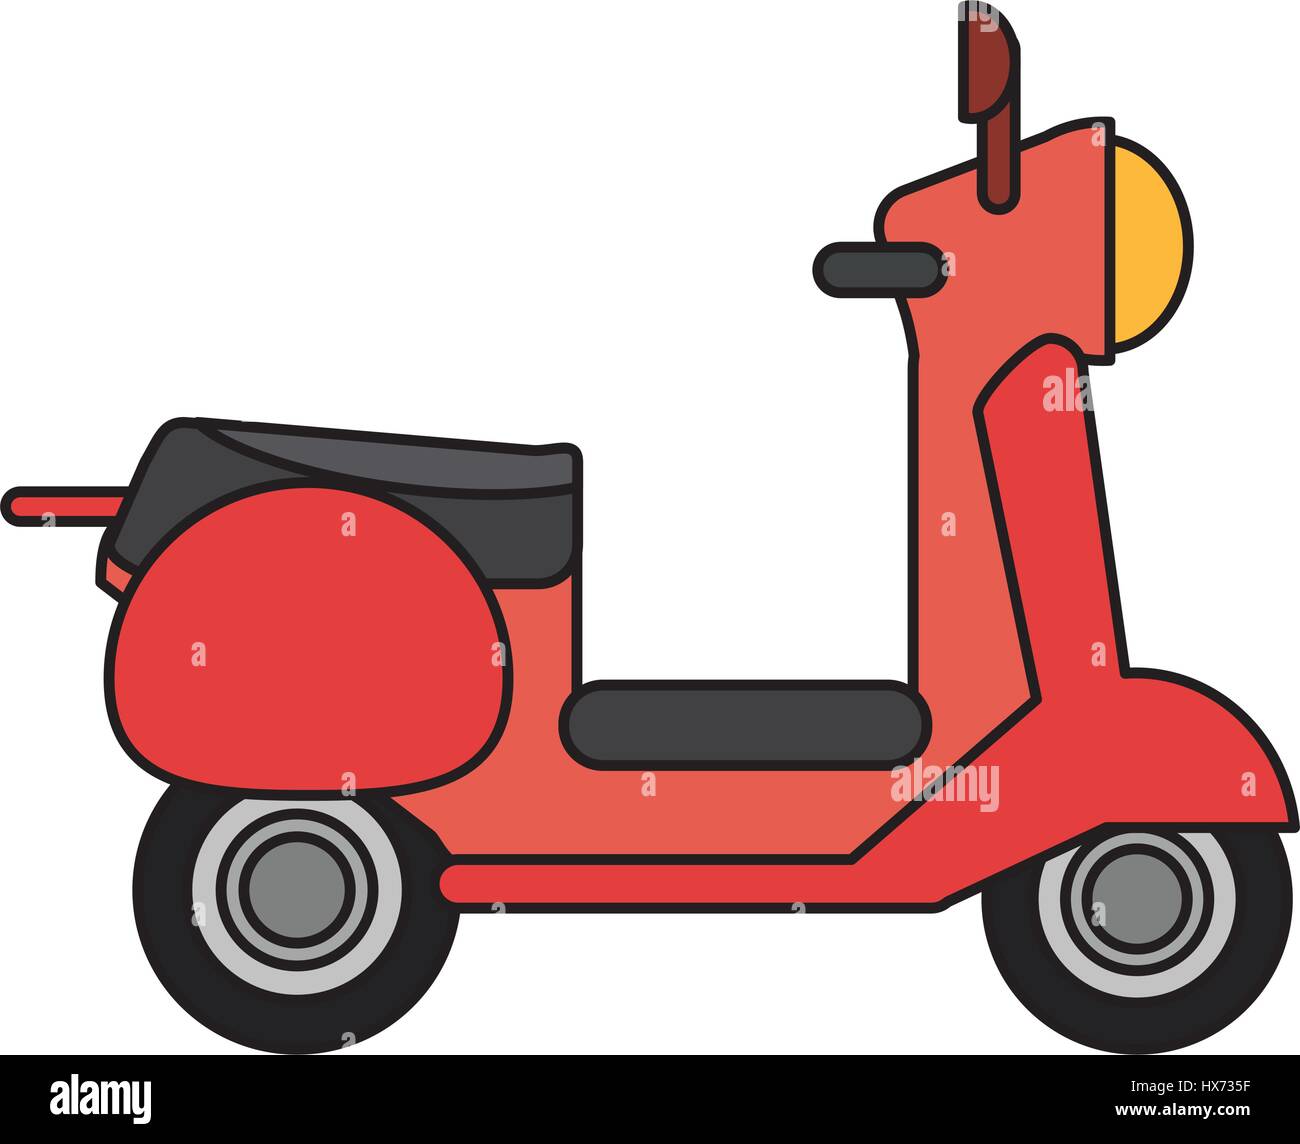 red scooter transport vehicle image Stock Vector